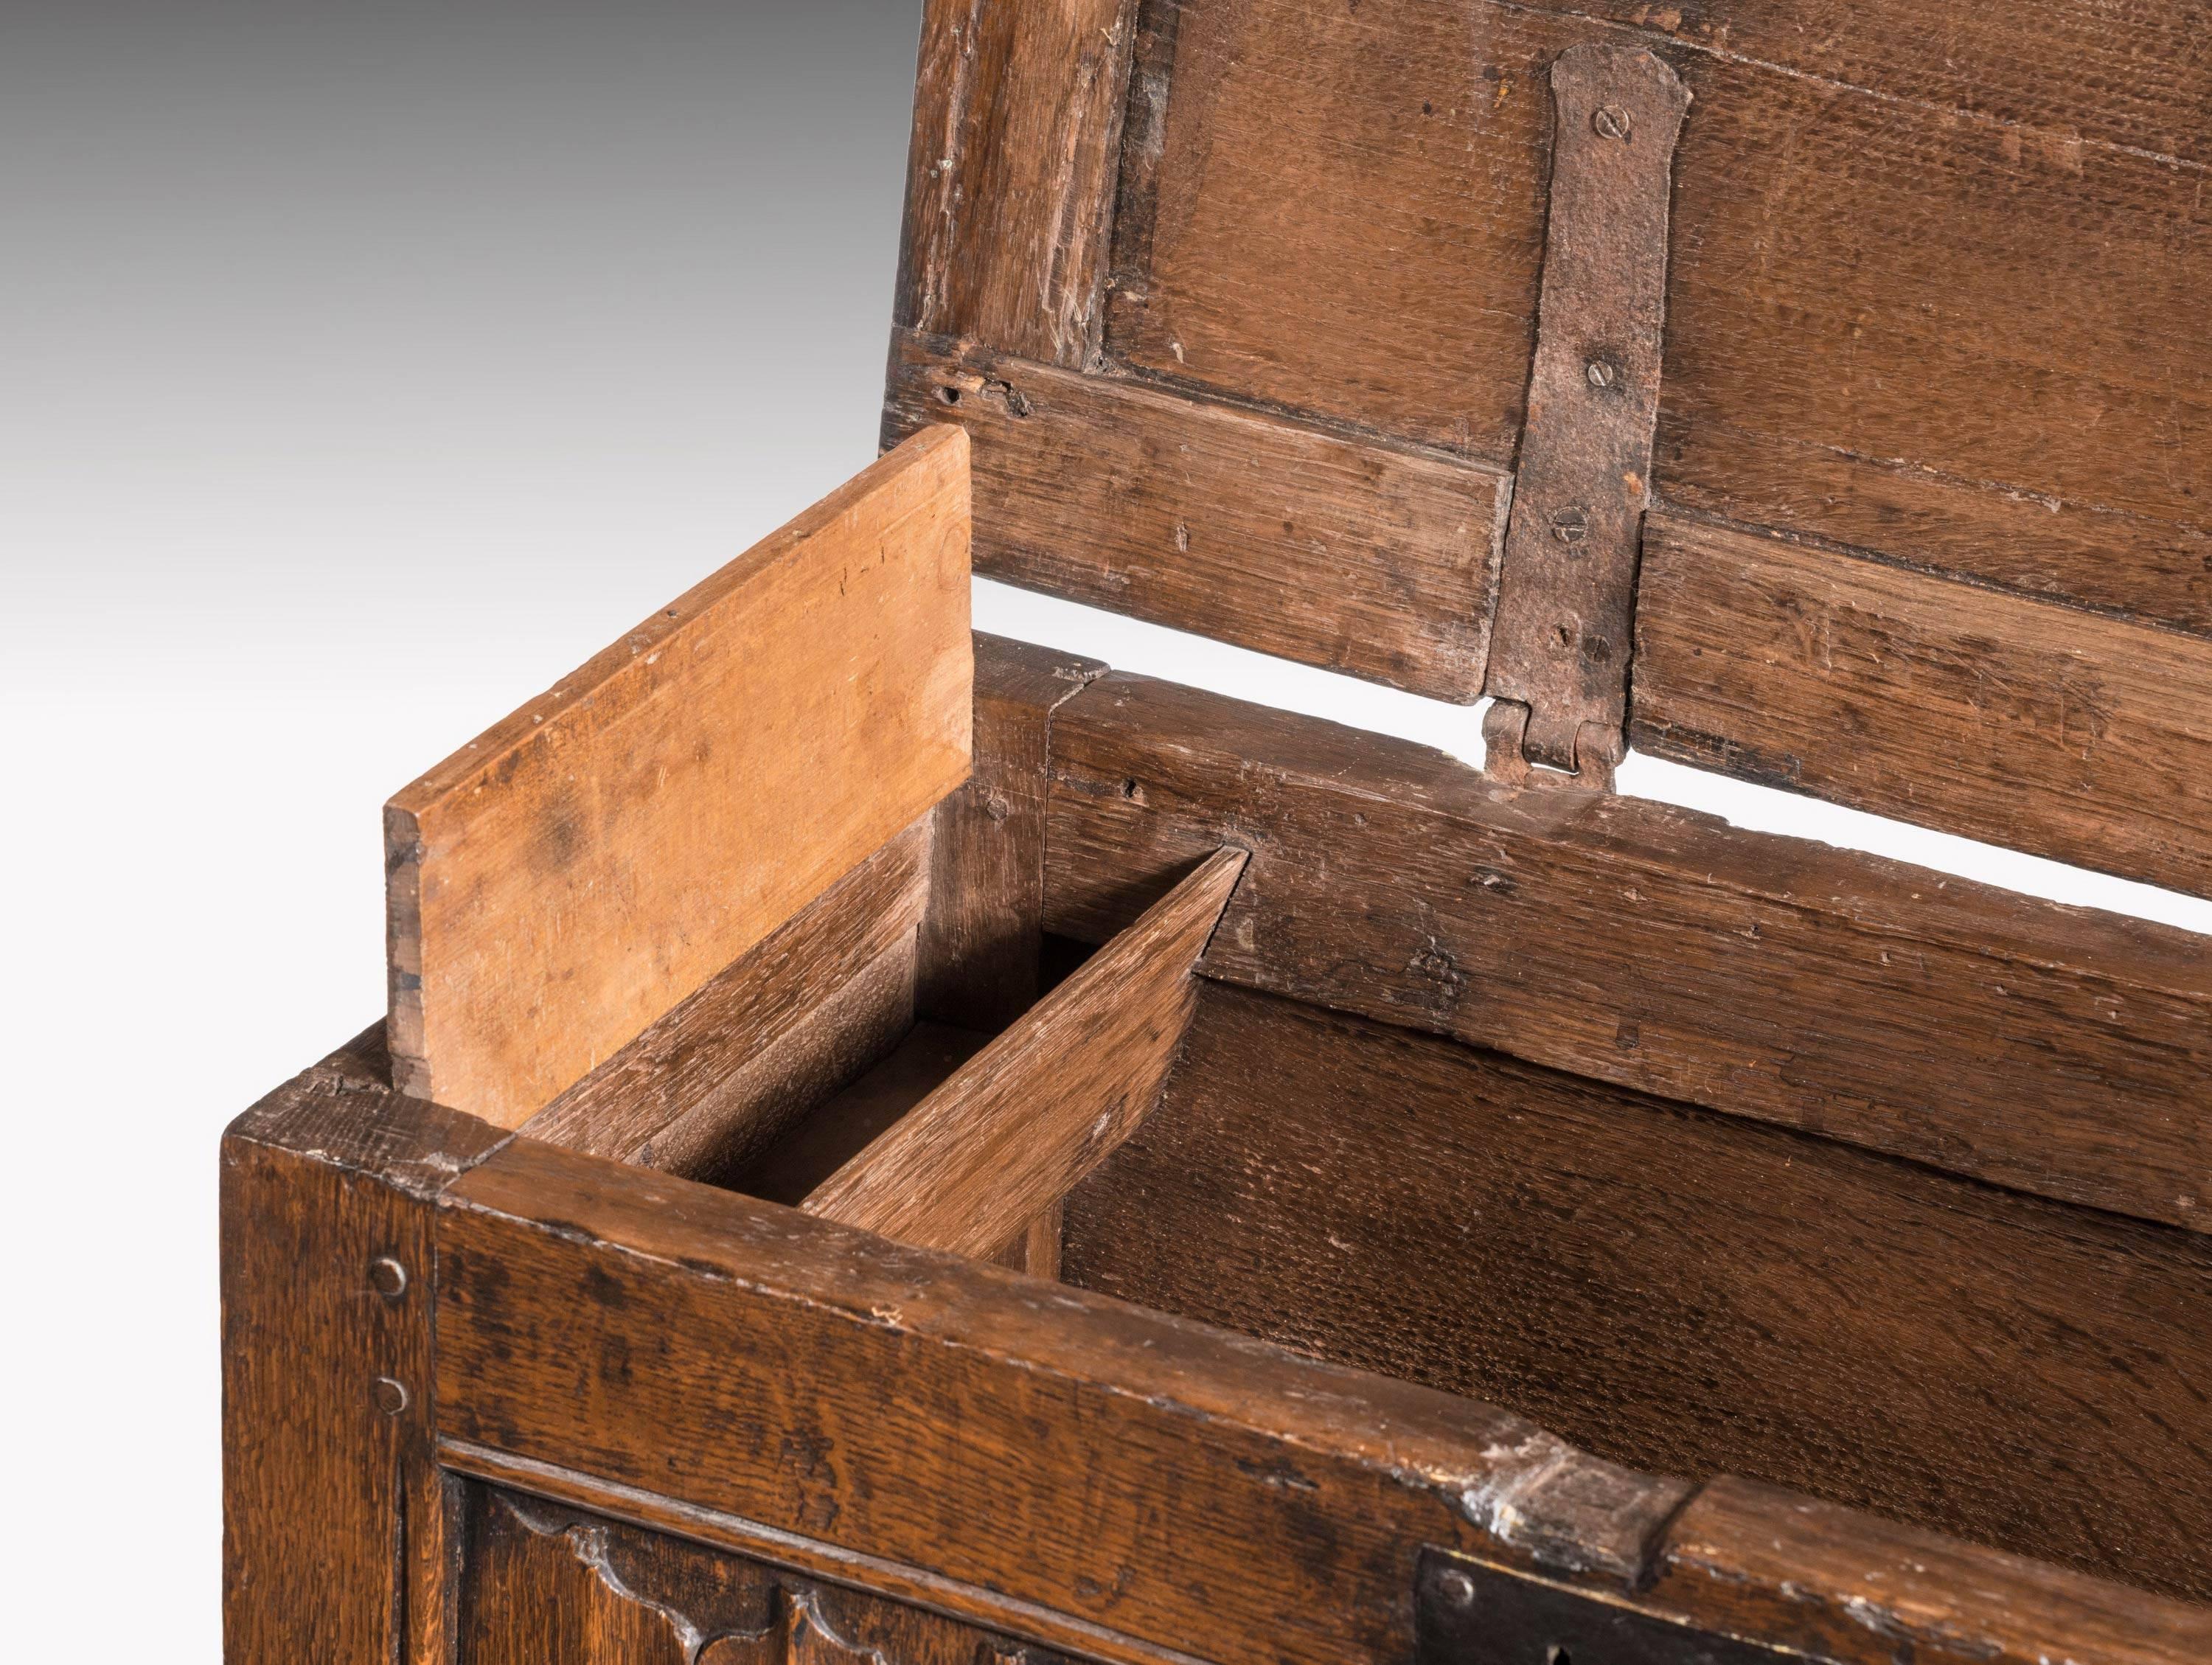 A rare late 17th century oak kist. The interior containing a candle section. With fine linen fold panelling and of very small and unusual size. 

N

A Kist (also called Coffer or Chest) is one of the oldest forms of furniture. It is typically a